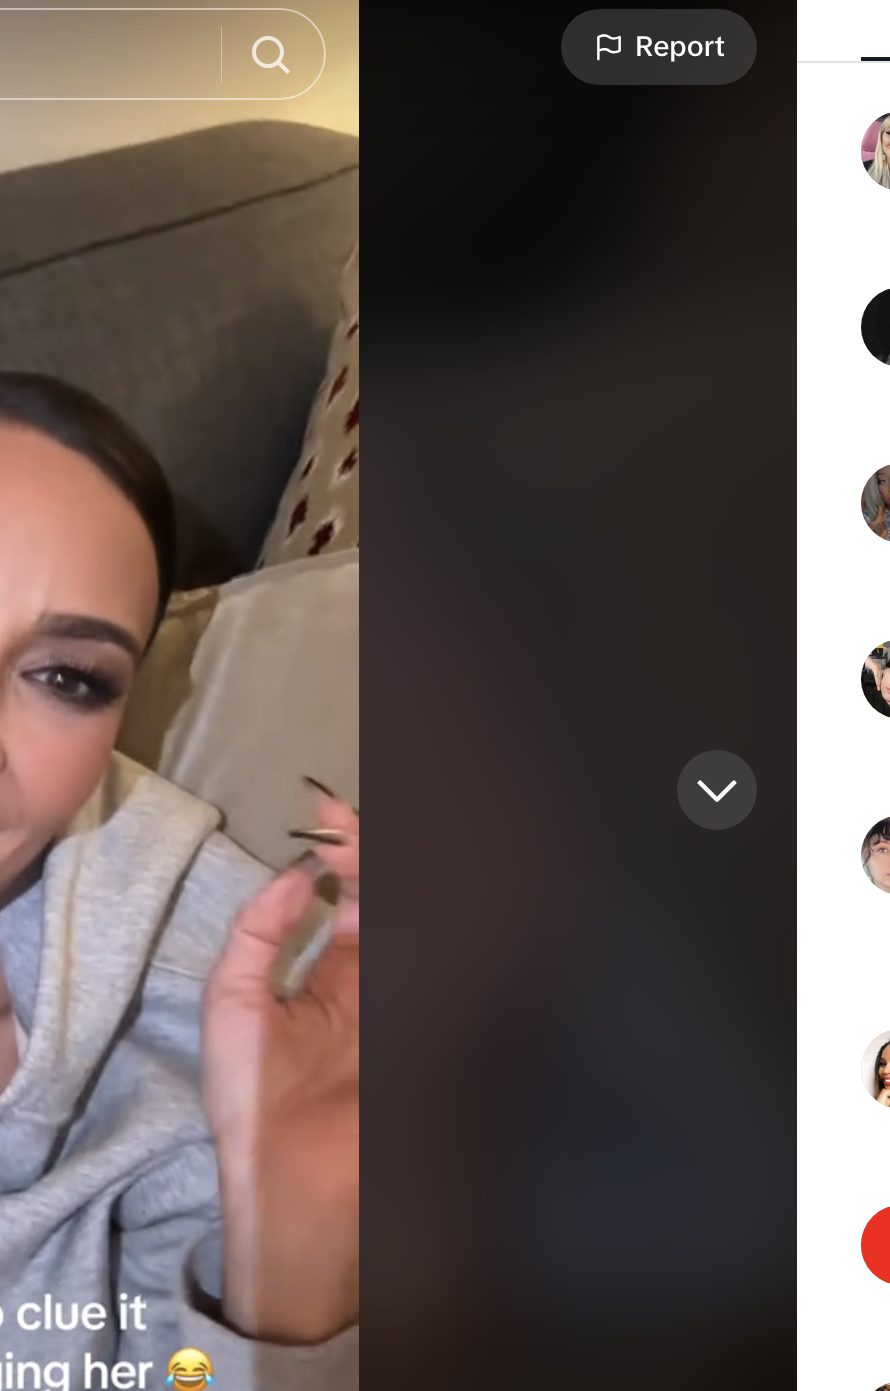 Closeup of Kim with the caption, &quot;Hahaha she had no clue it was gonna start aging her&quot;